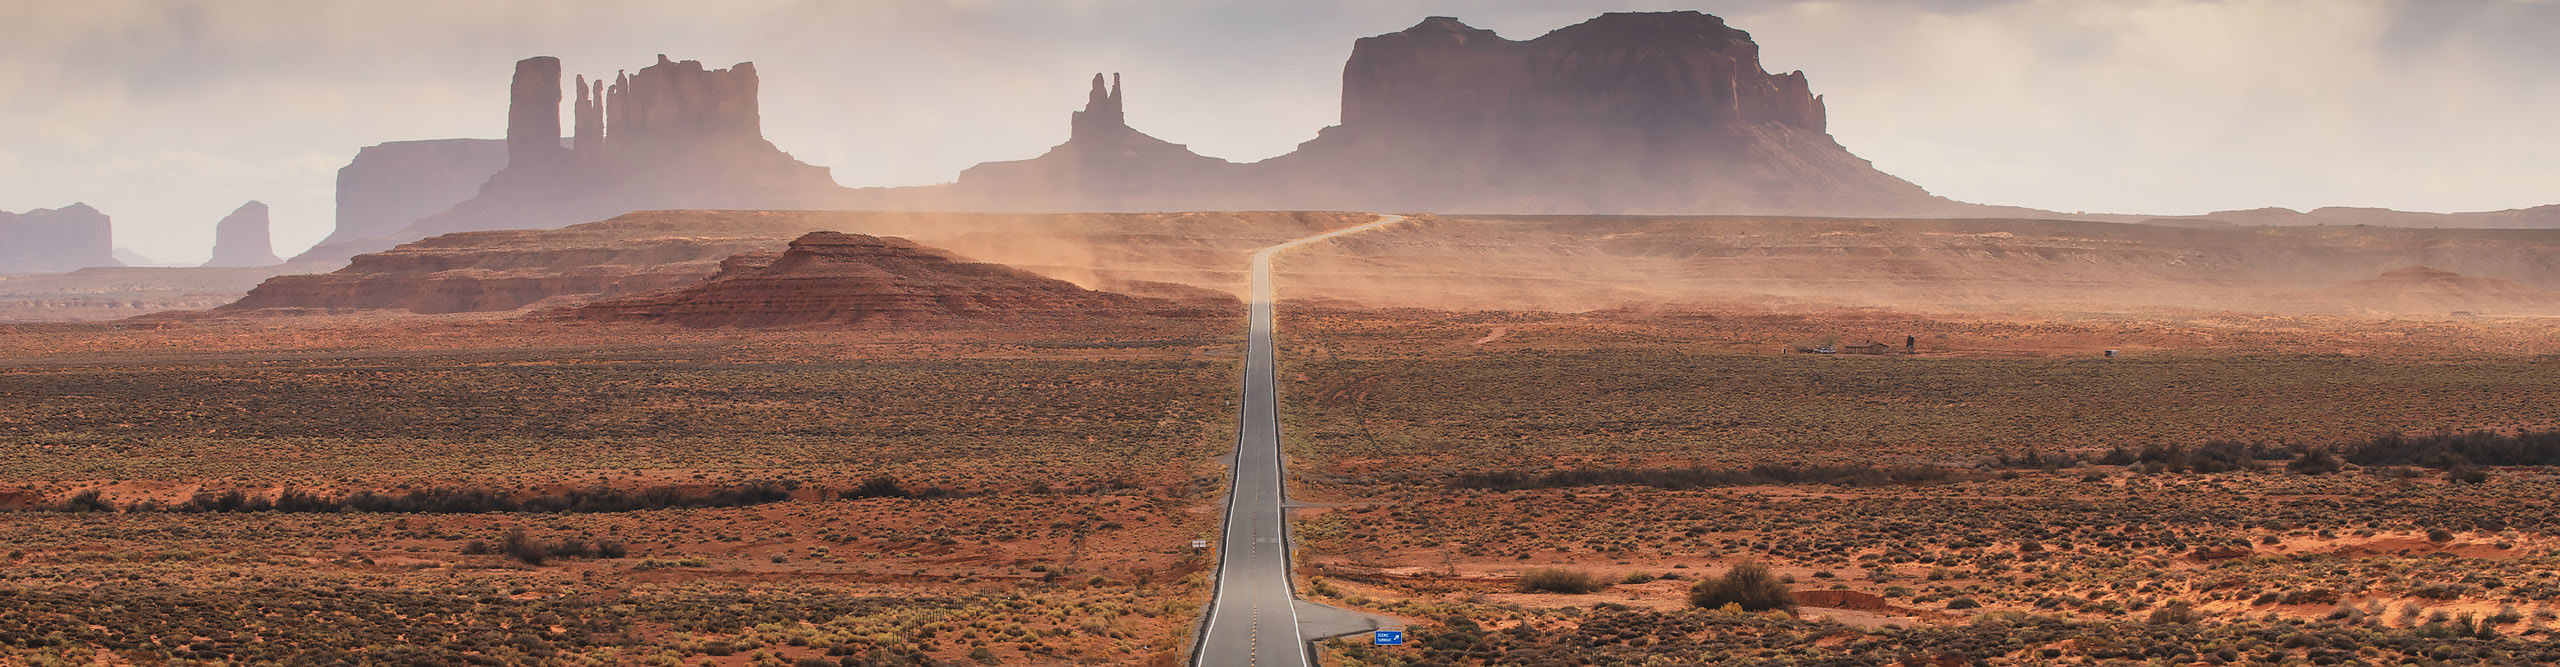 U.S. Route 163, Monument Valley, on a hazy clear day, in the red desert of Arizona